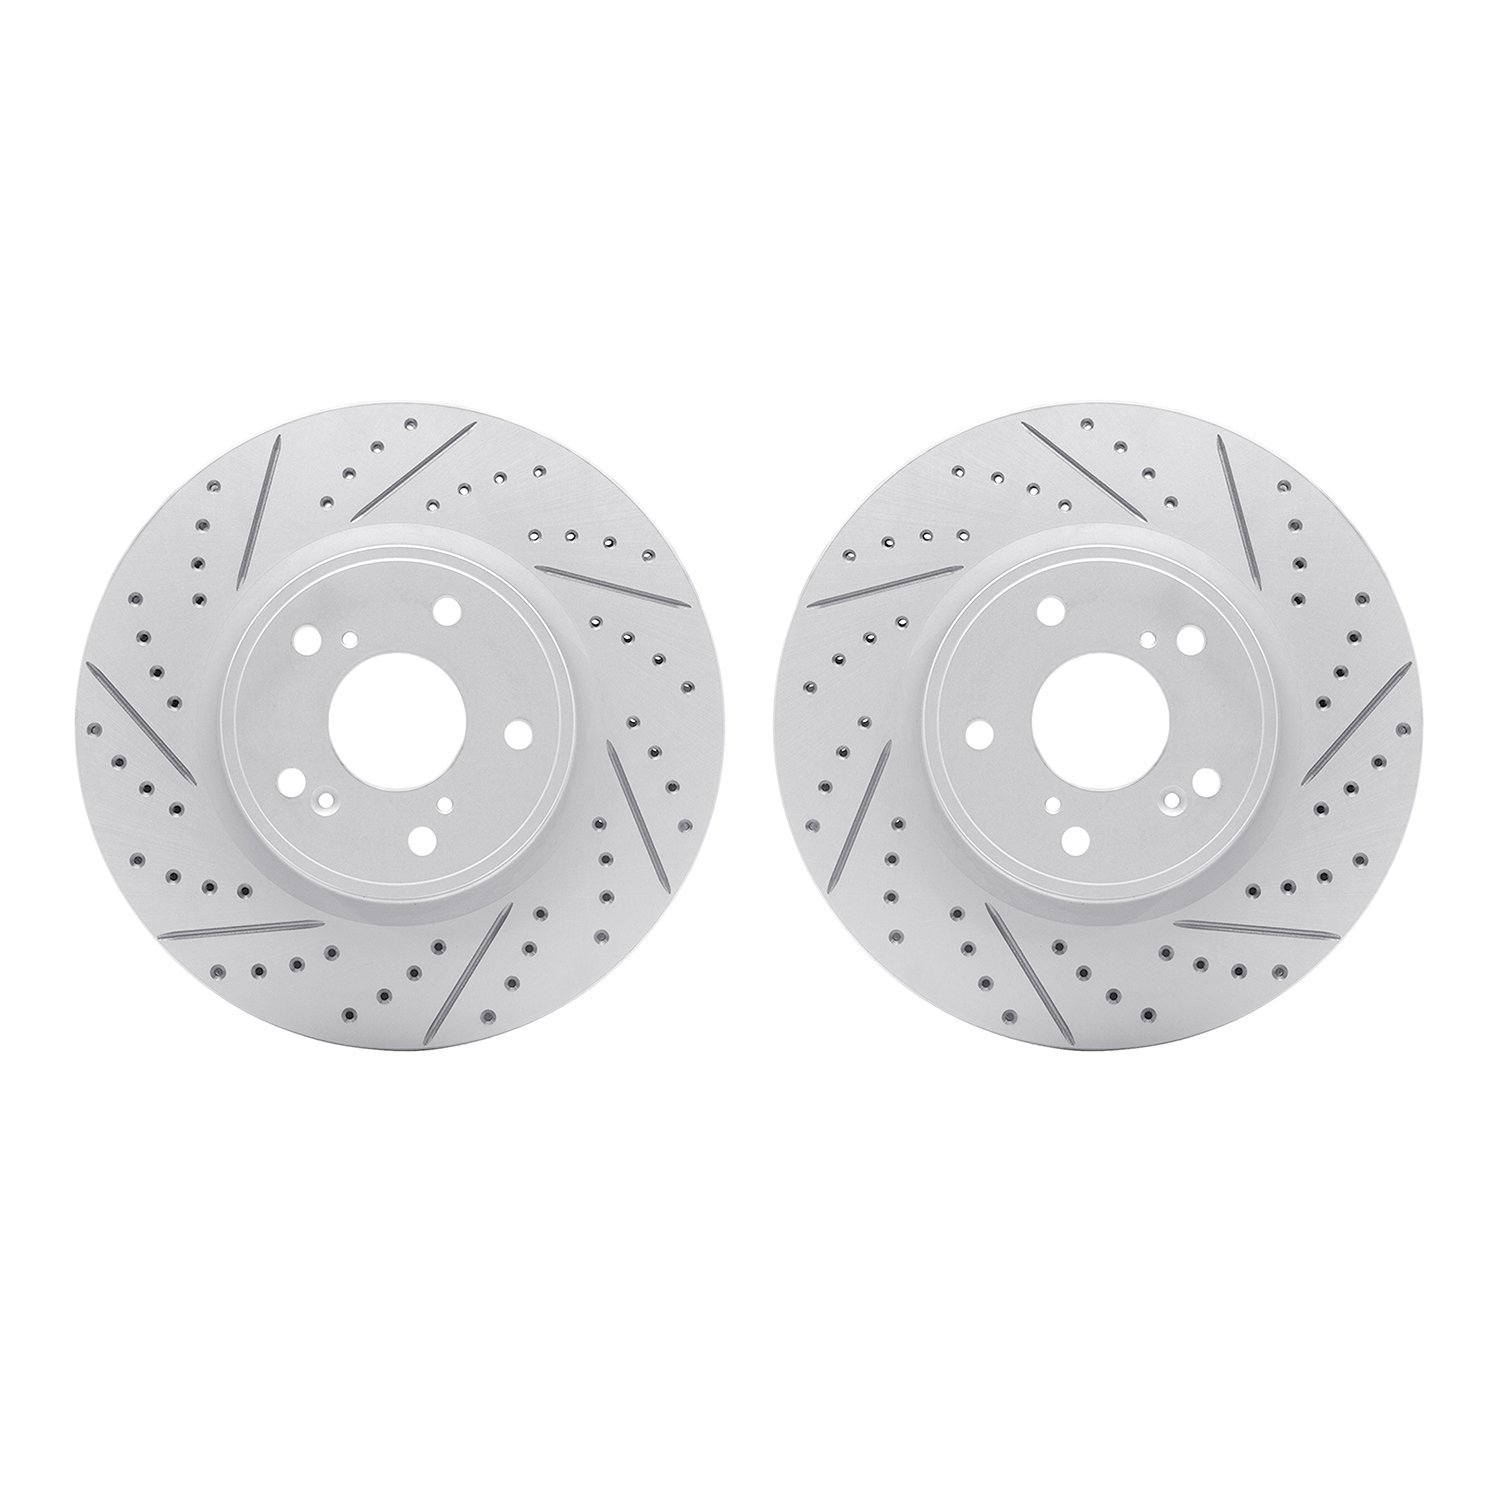 2002-58000 Geoperformance Drilled/Slotted Brake Rotors, Fits Select Acura/Honda, Position: Front